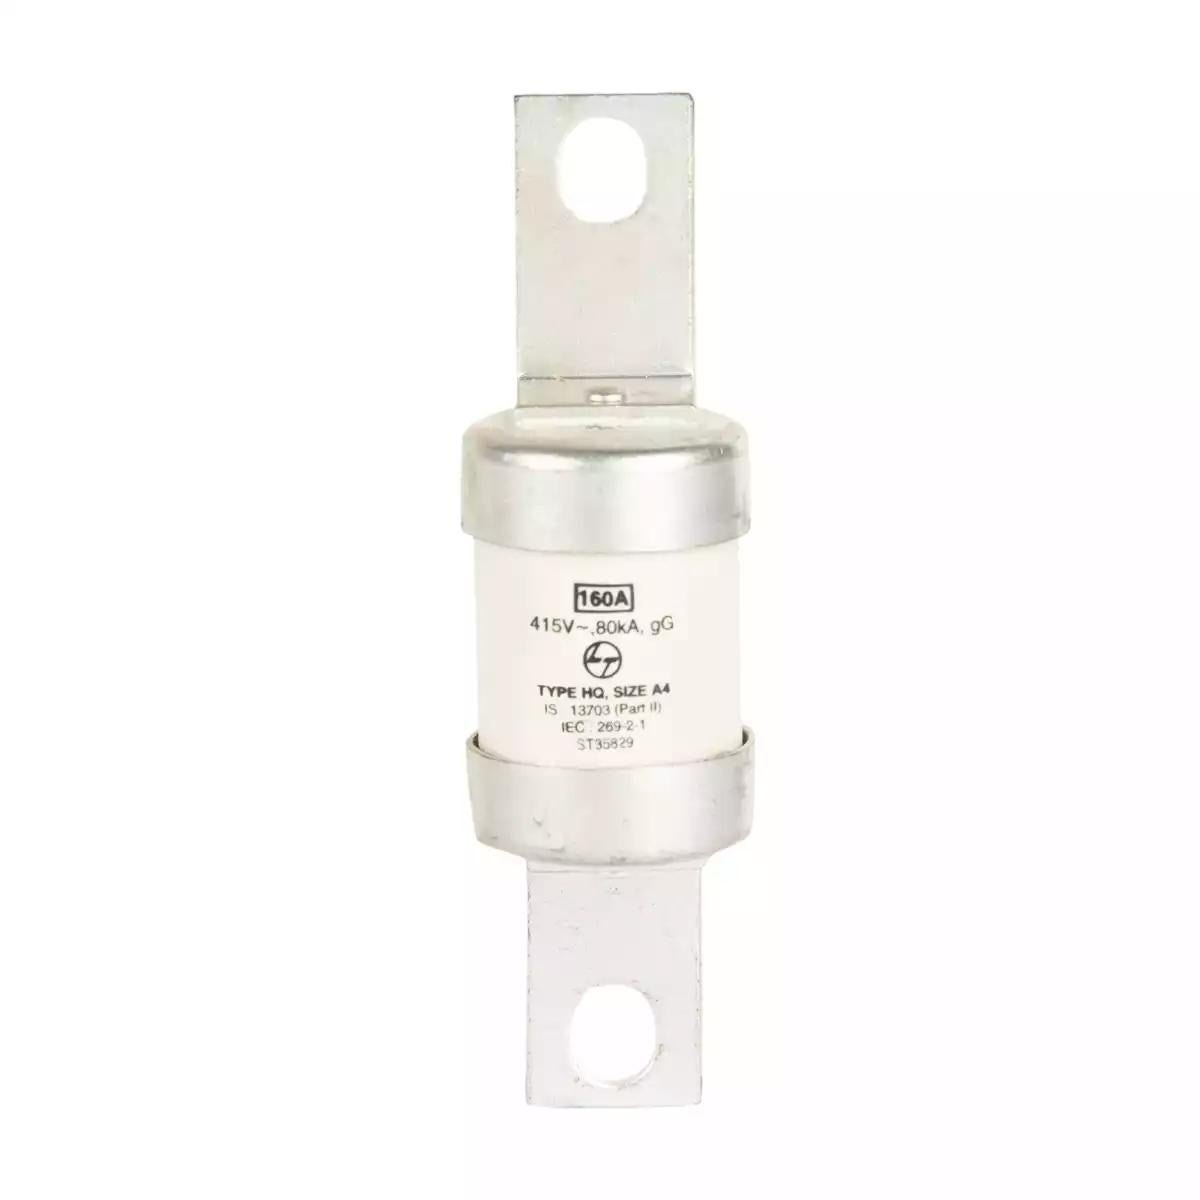 HQ Bolted HRC fuse 100A 415V AC Size A4